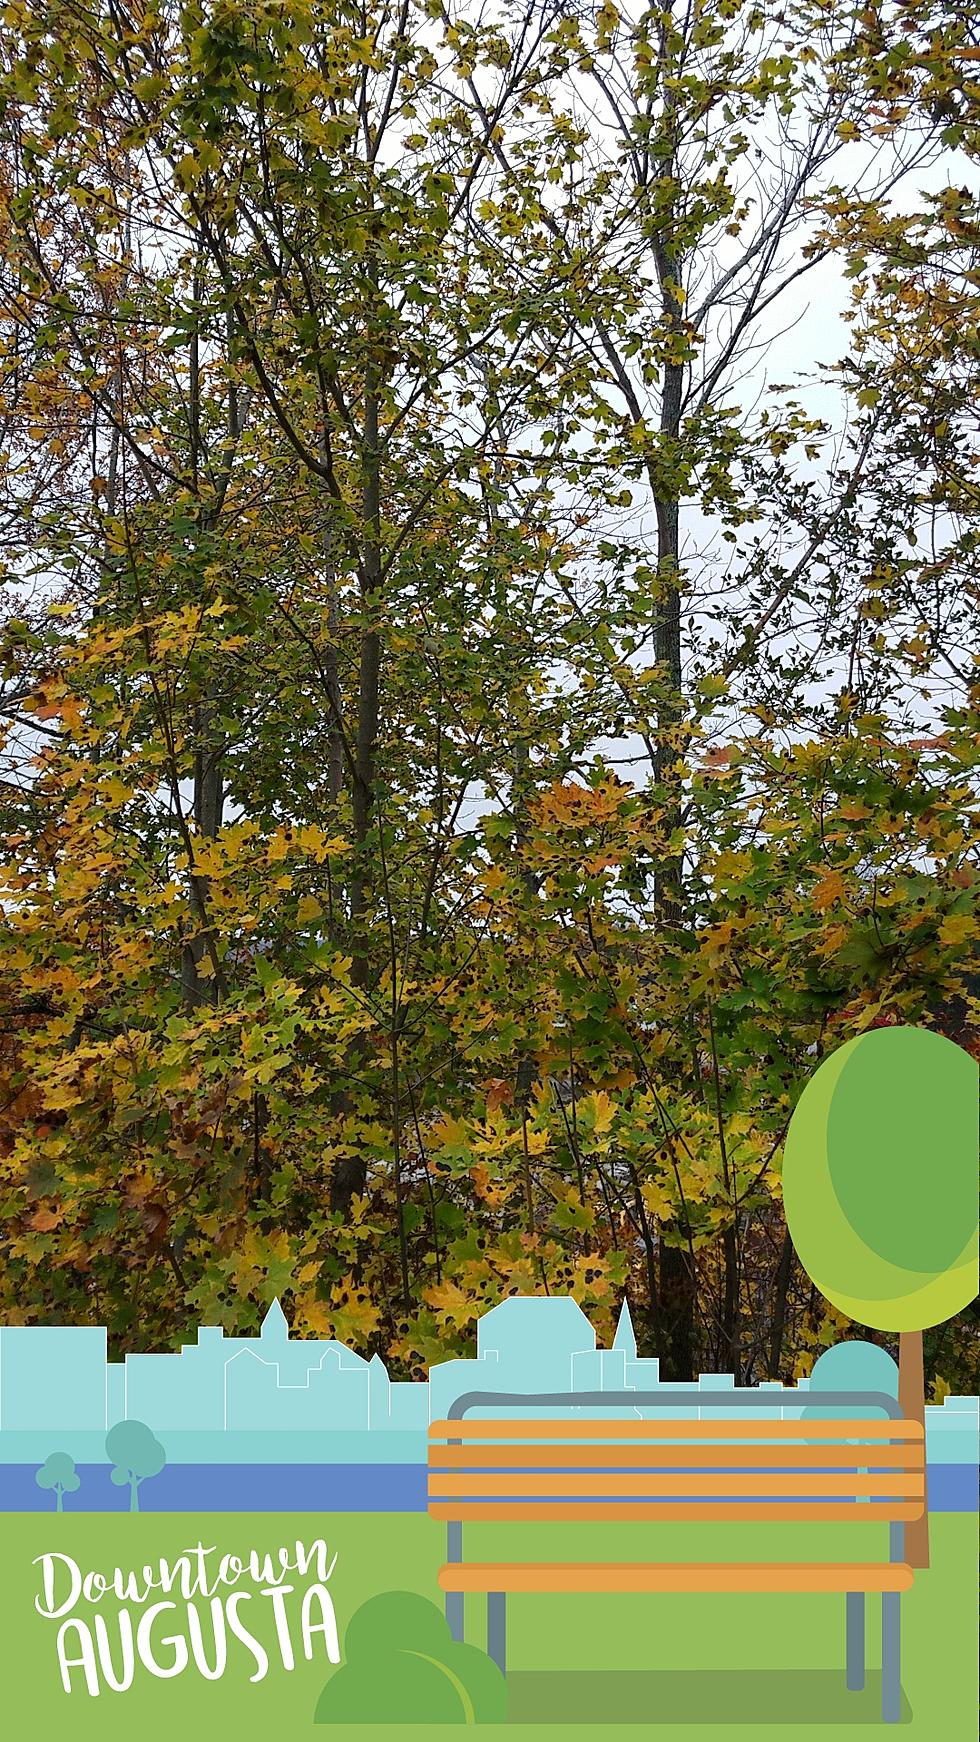 In Case You Didn’t Know, Downtown Augusta Now Has Its Own Snapchat Filter